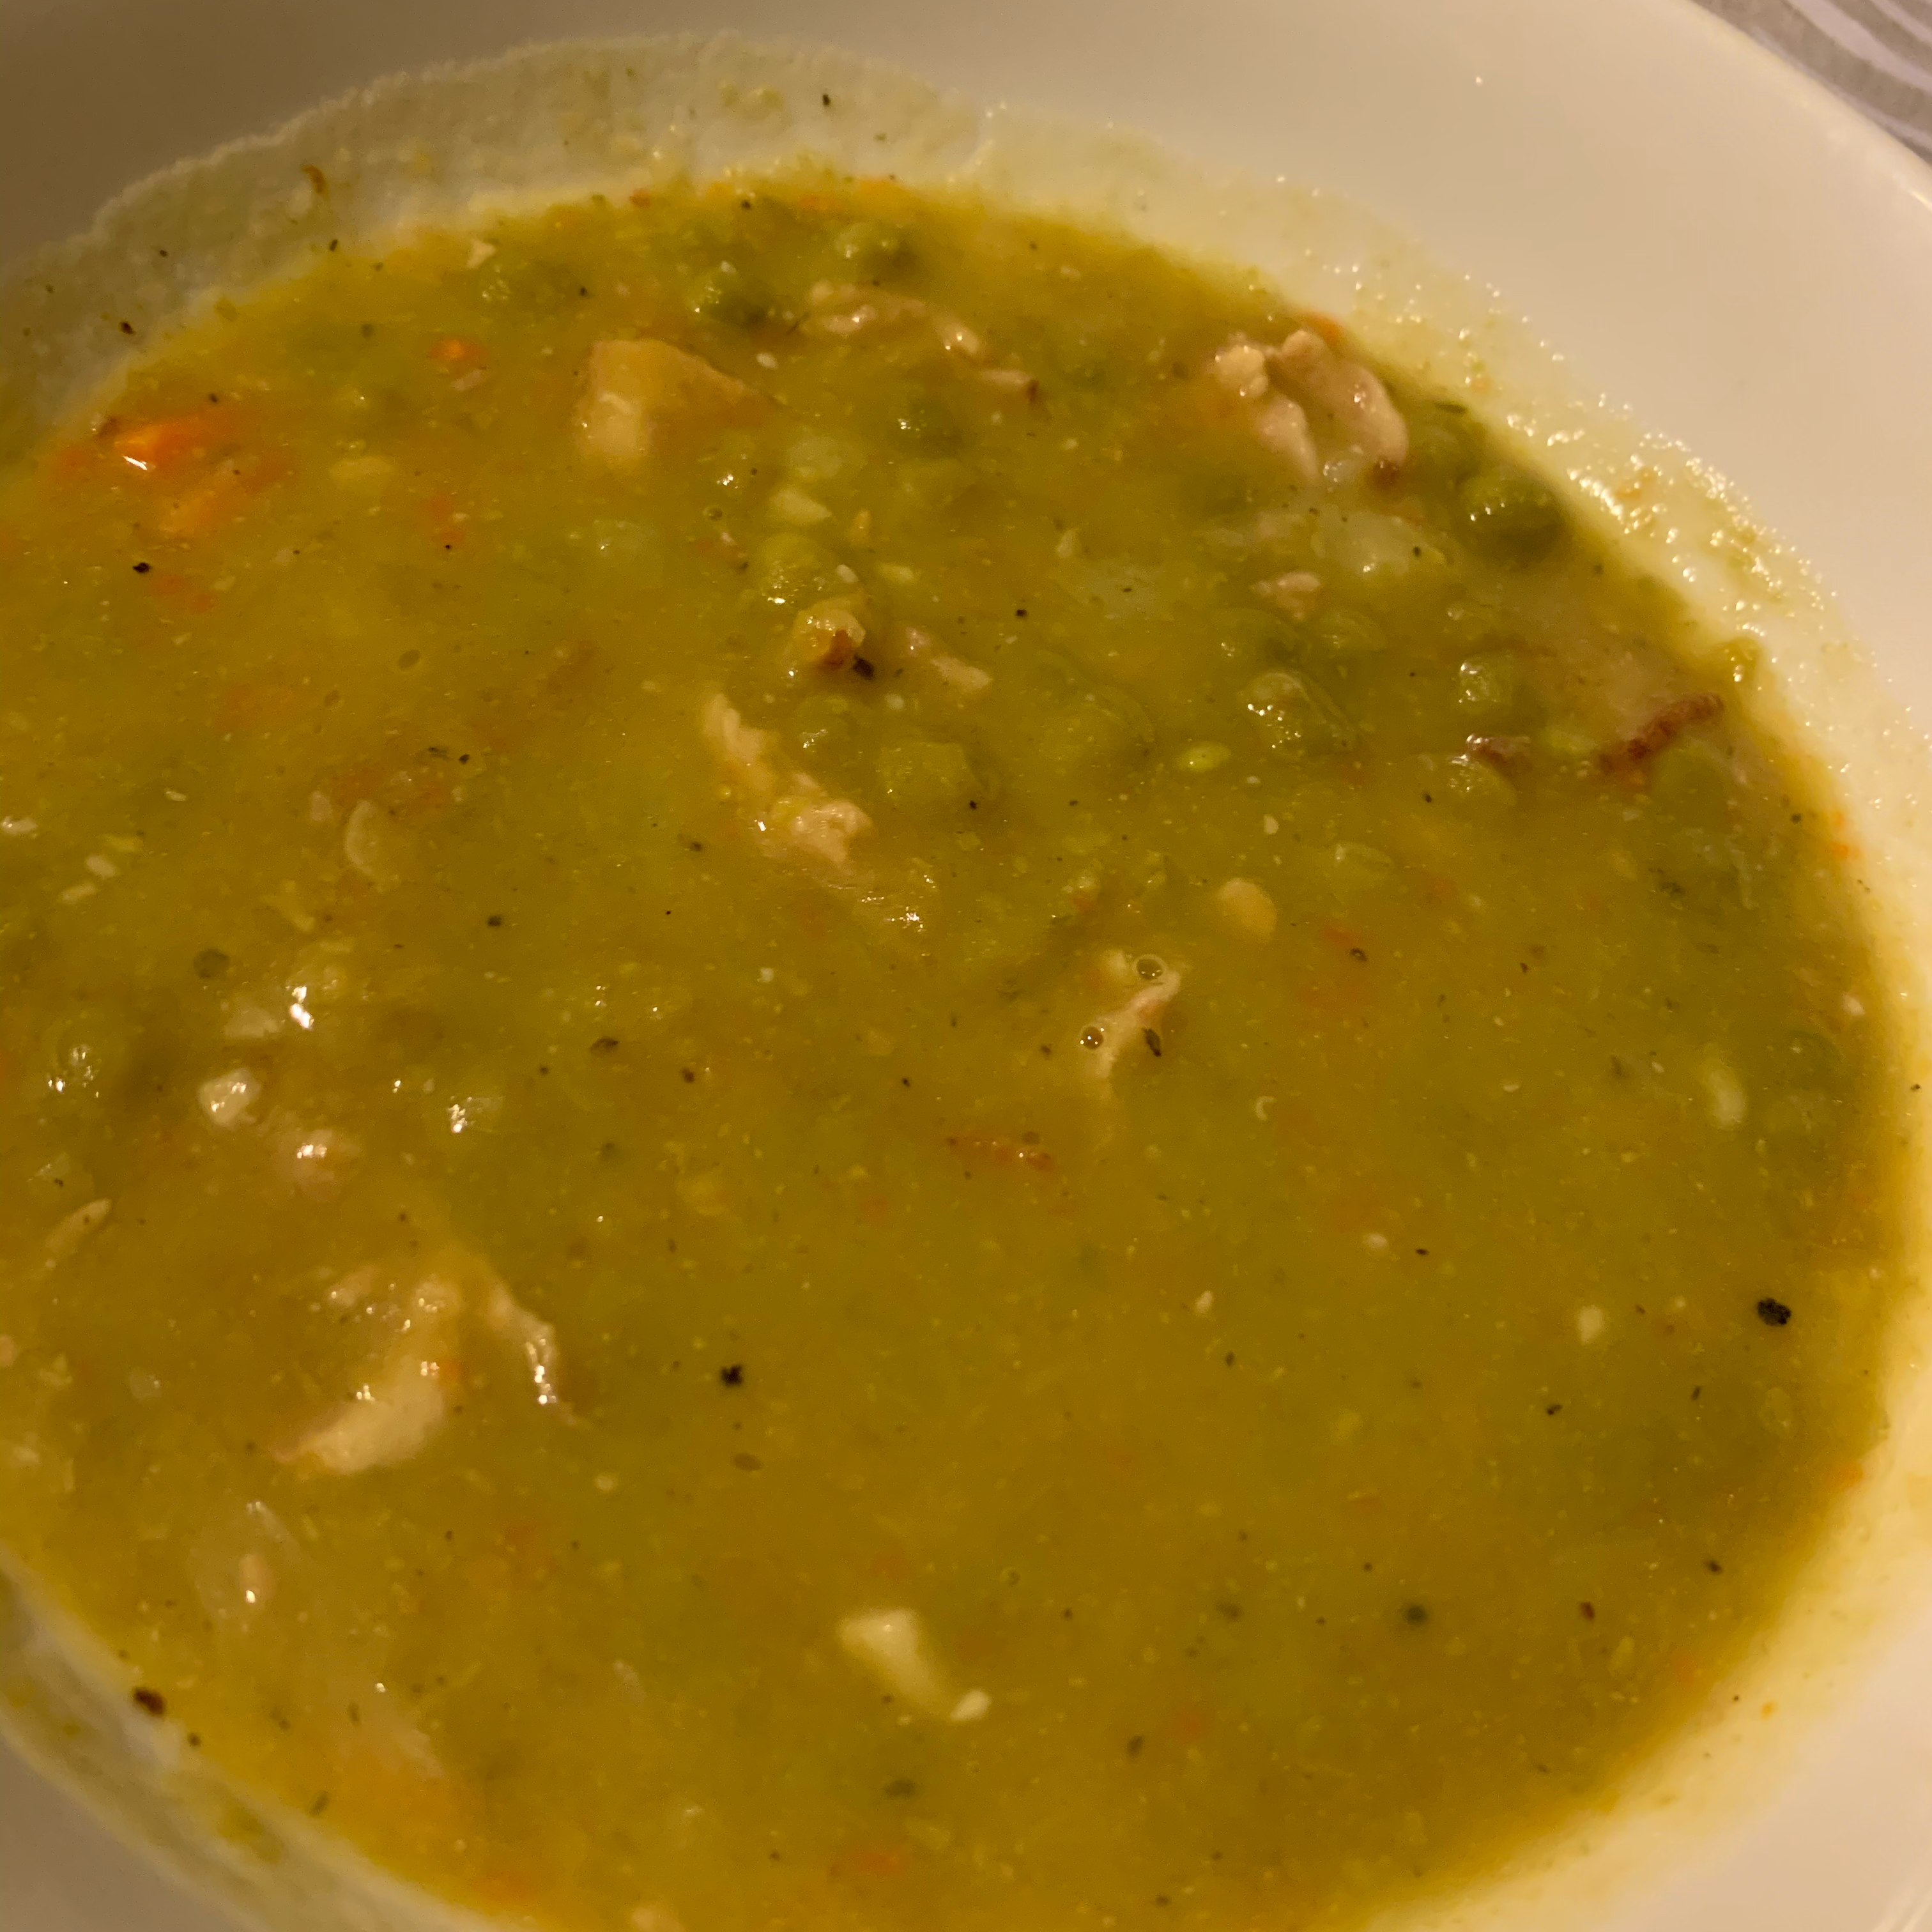 Split Pea Soup with Rosemary tinamen87